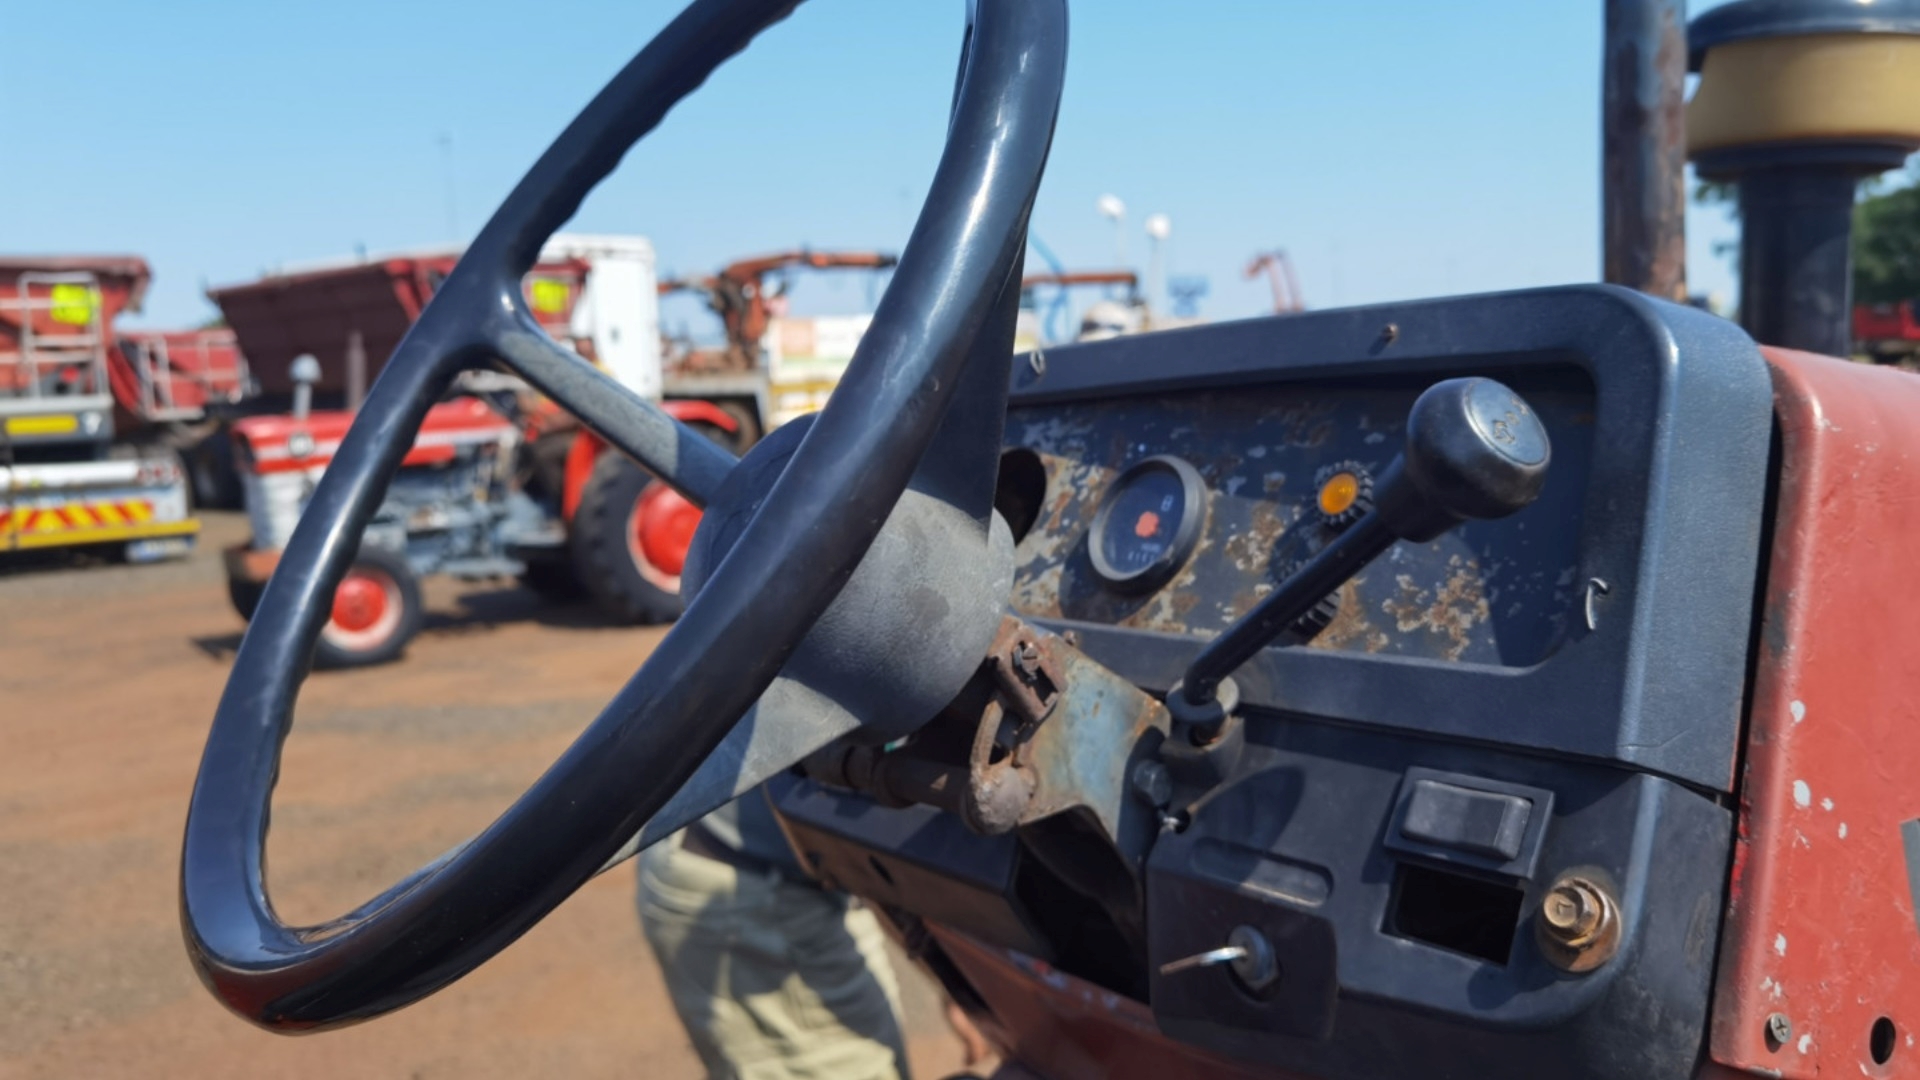 Massey Ferguson Tractors 375 for sale by WCT Auctions Pty Ltd  | AgriMag Marketplace